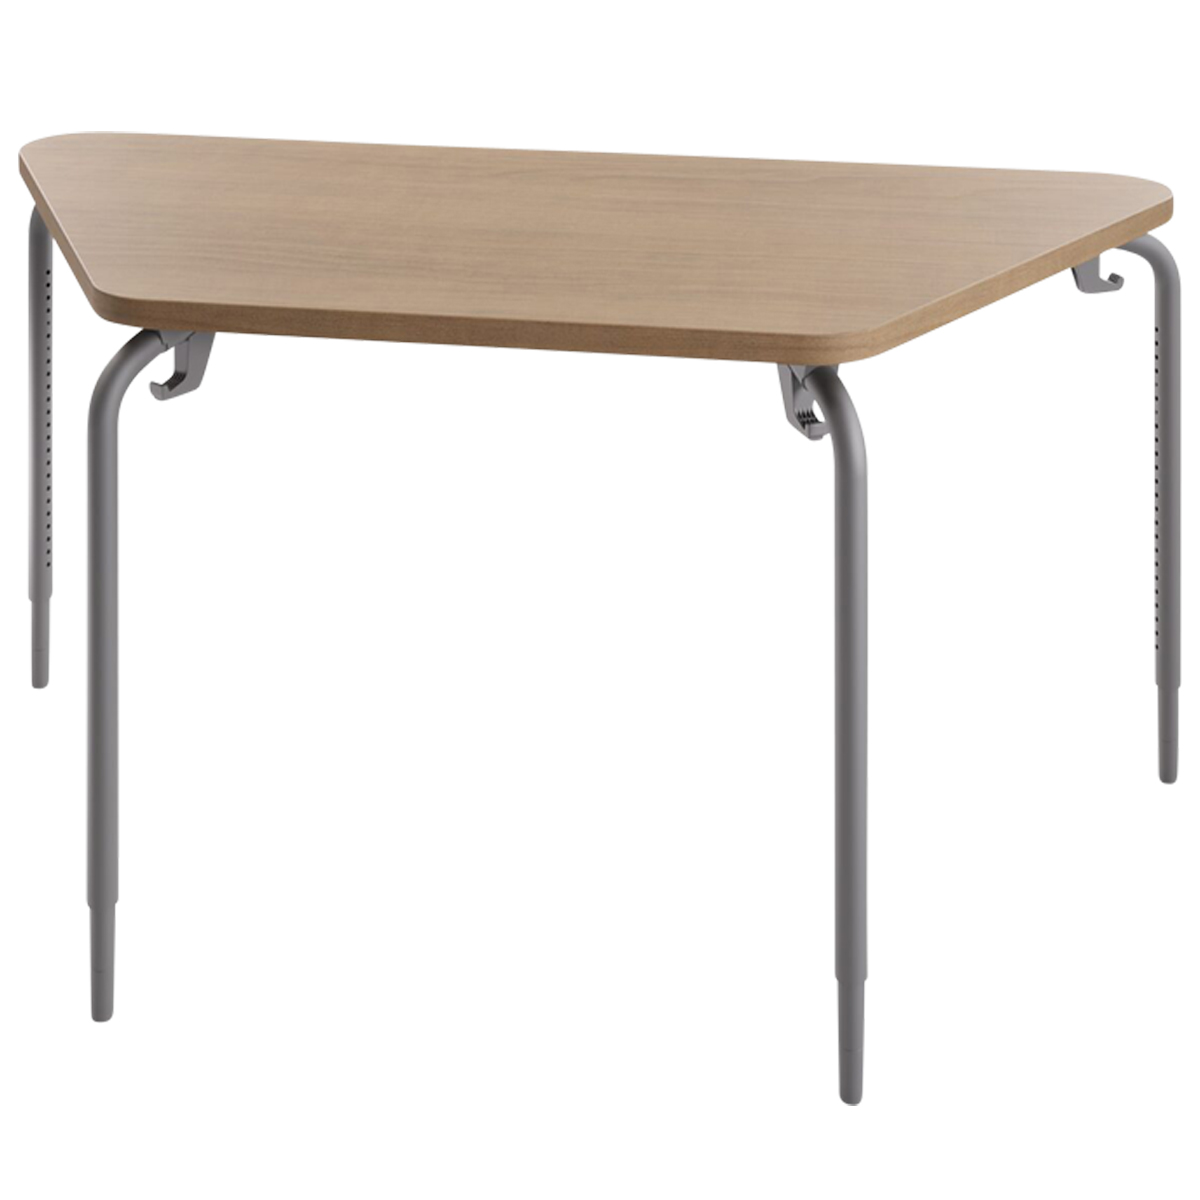 Numbers High Range 30x60 Trapezoid Table